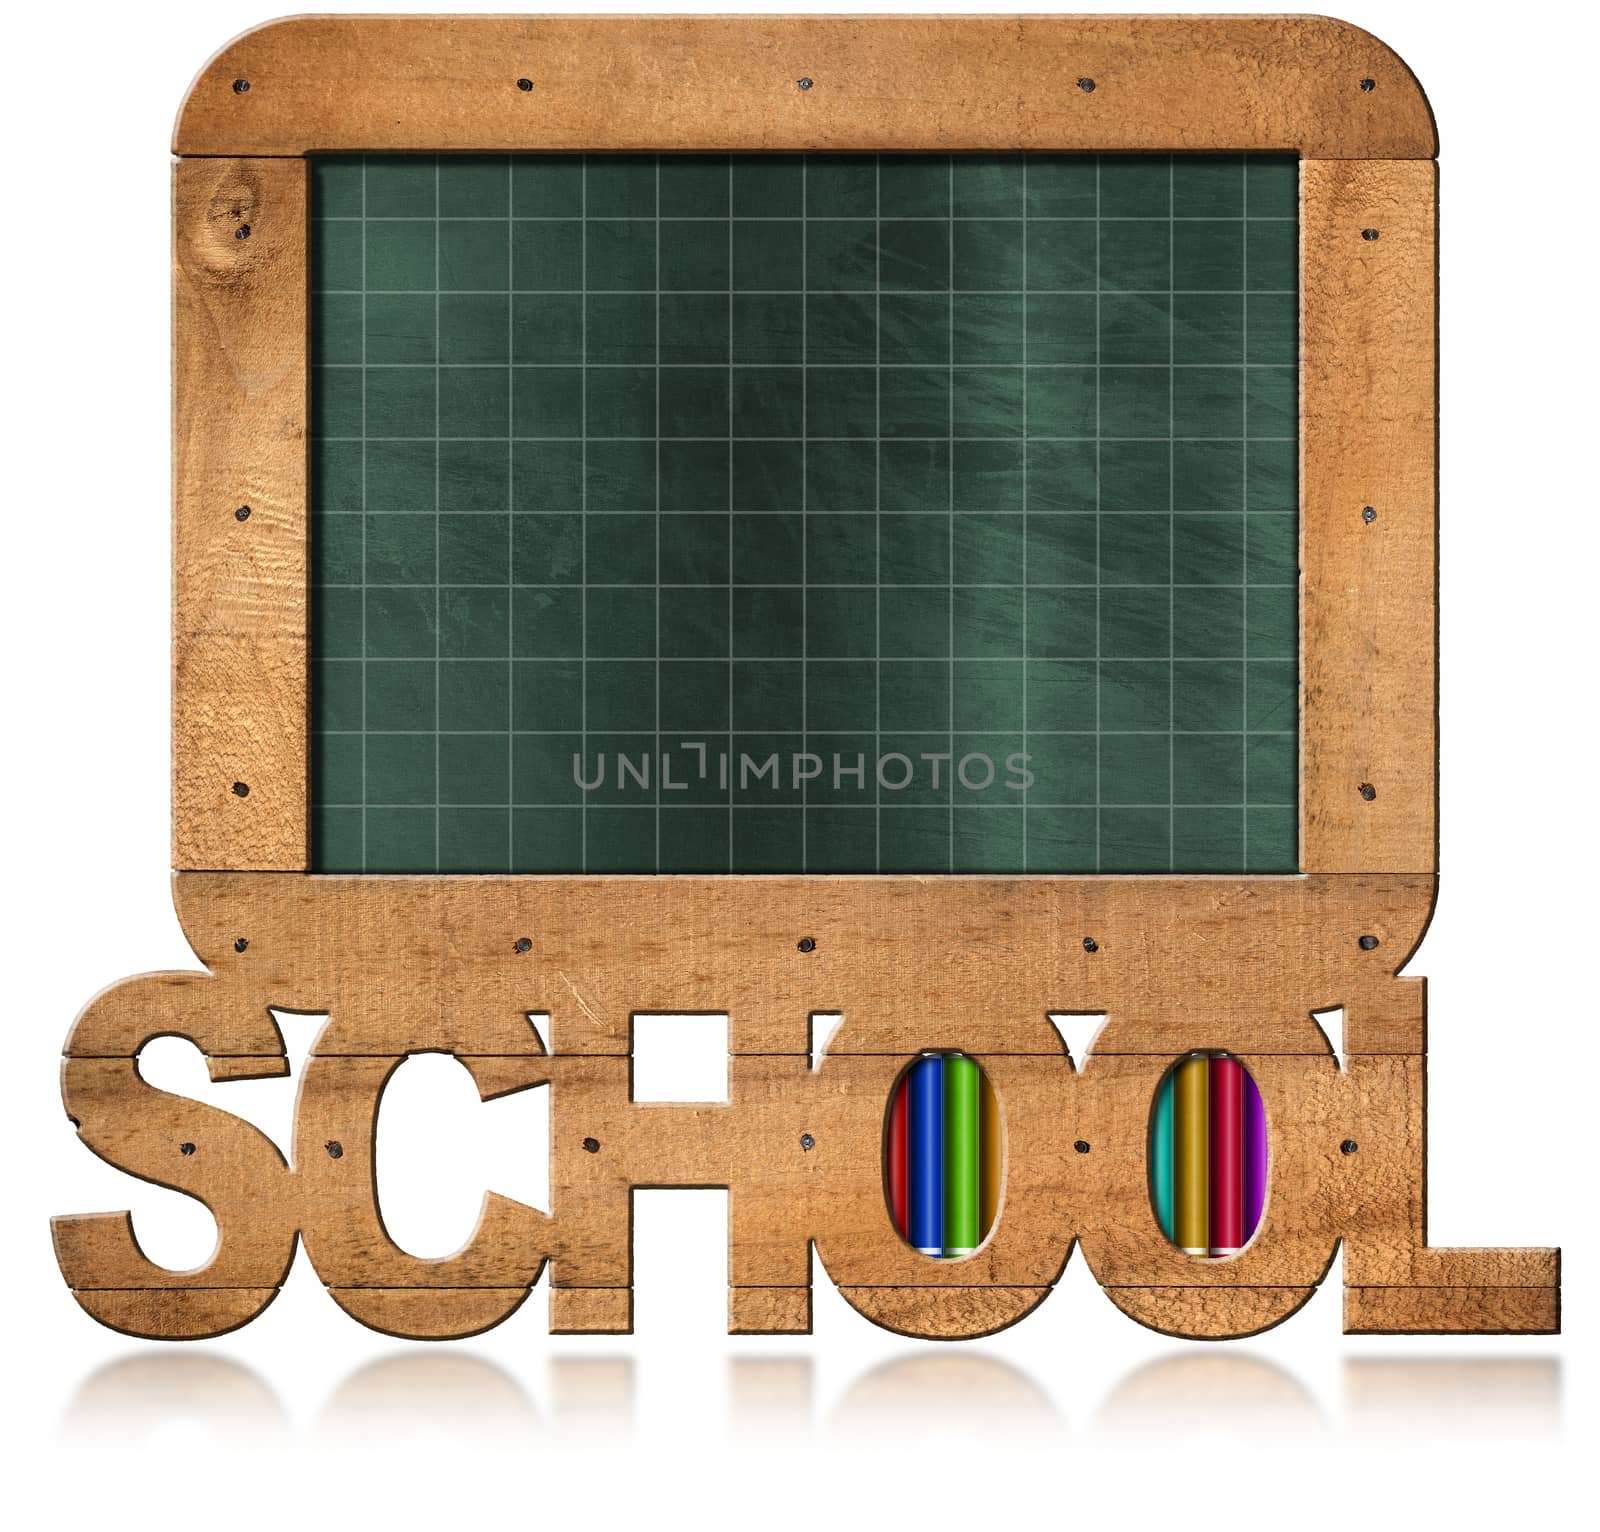 Old empty and green blackboard with wooden rectangular frame, text School, books and nails. Isolated on white background